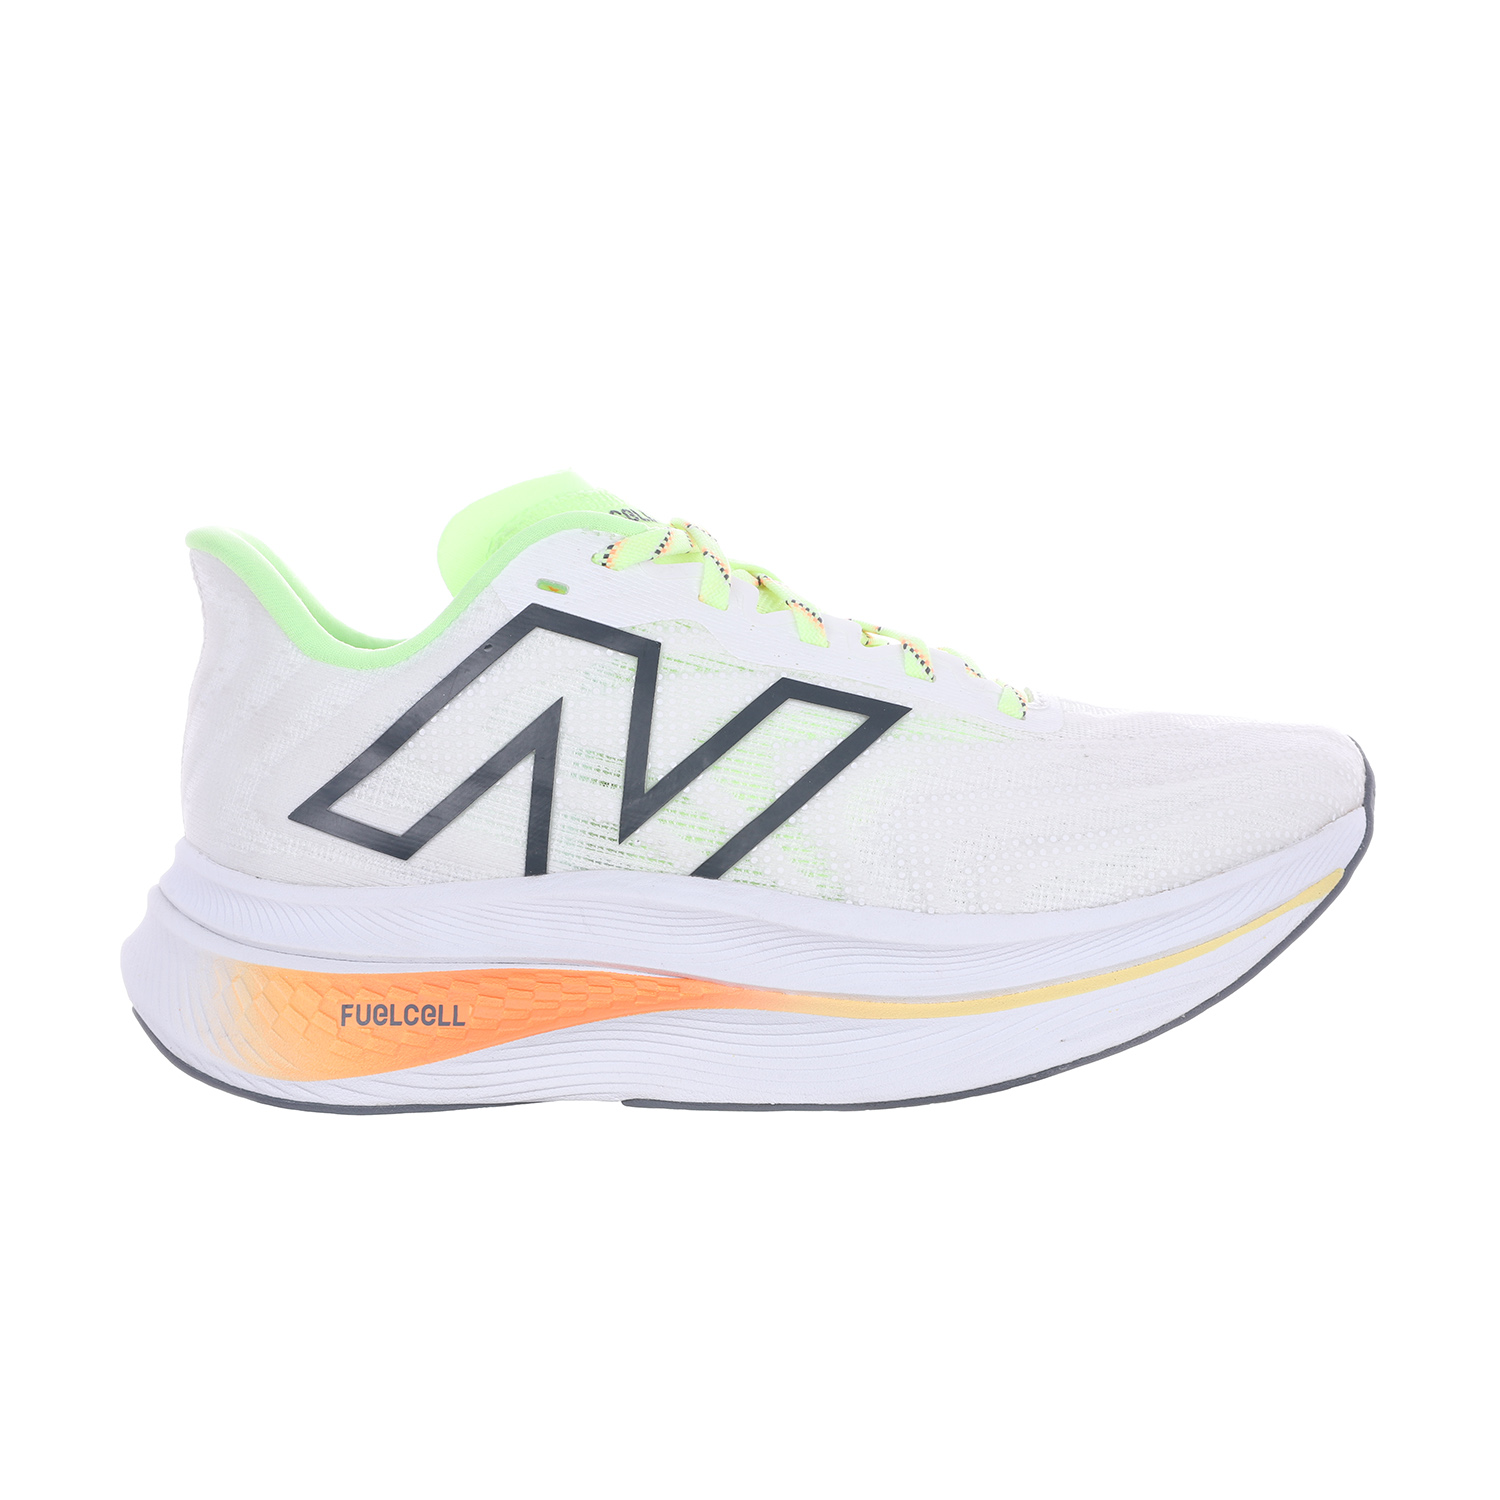 NEW BALANCE FUELCELL SUPERCOMP TRAINER V2 - MisterRunning